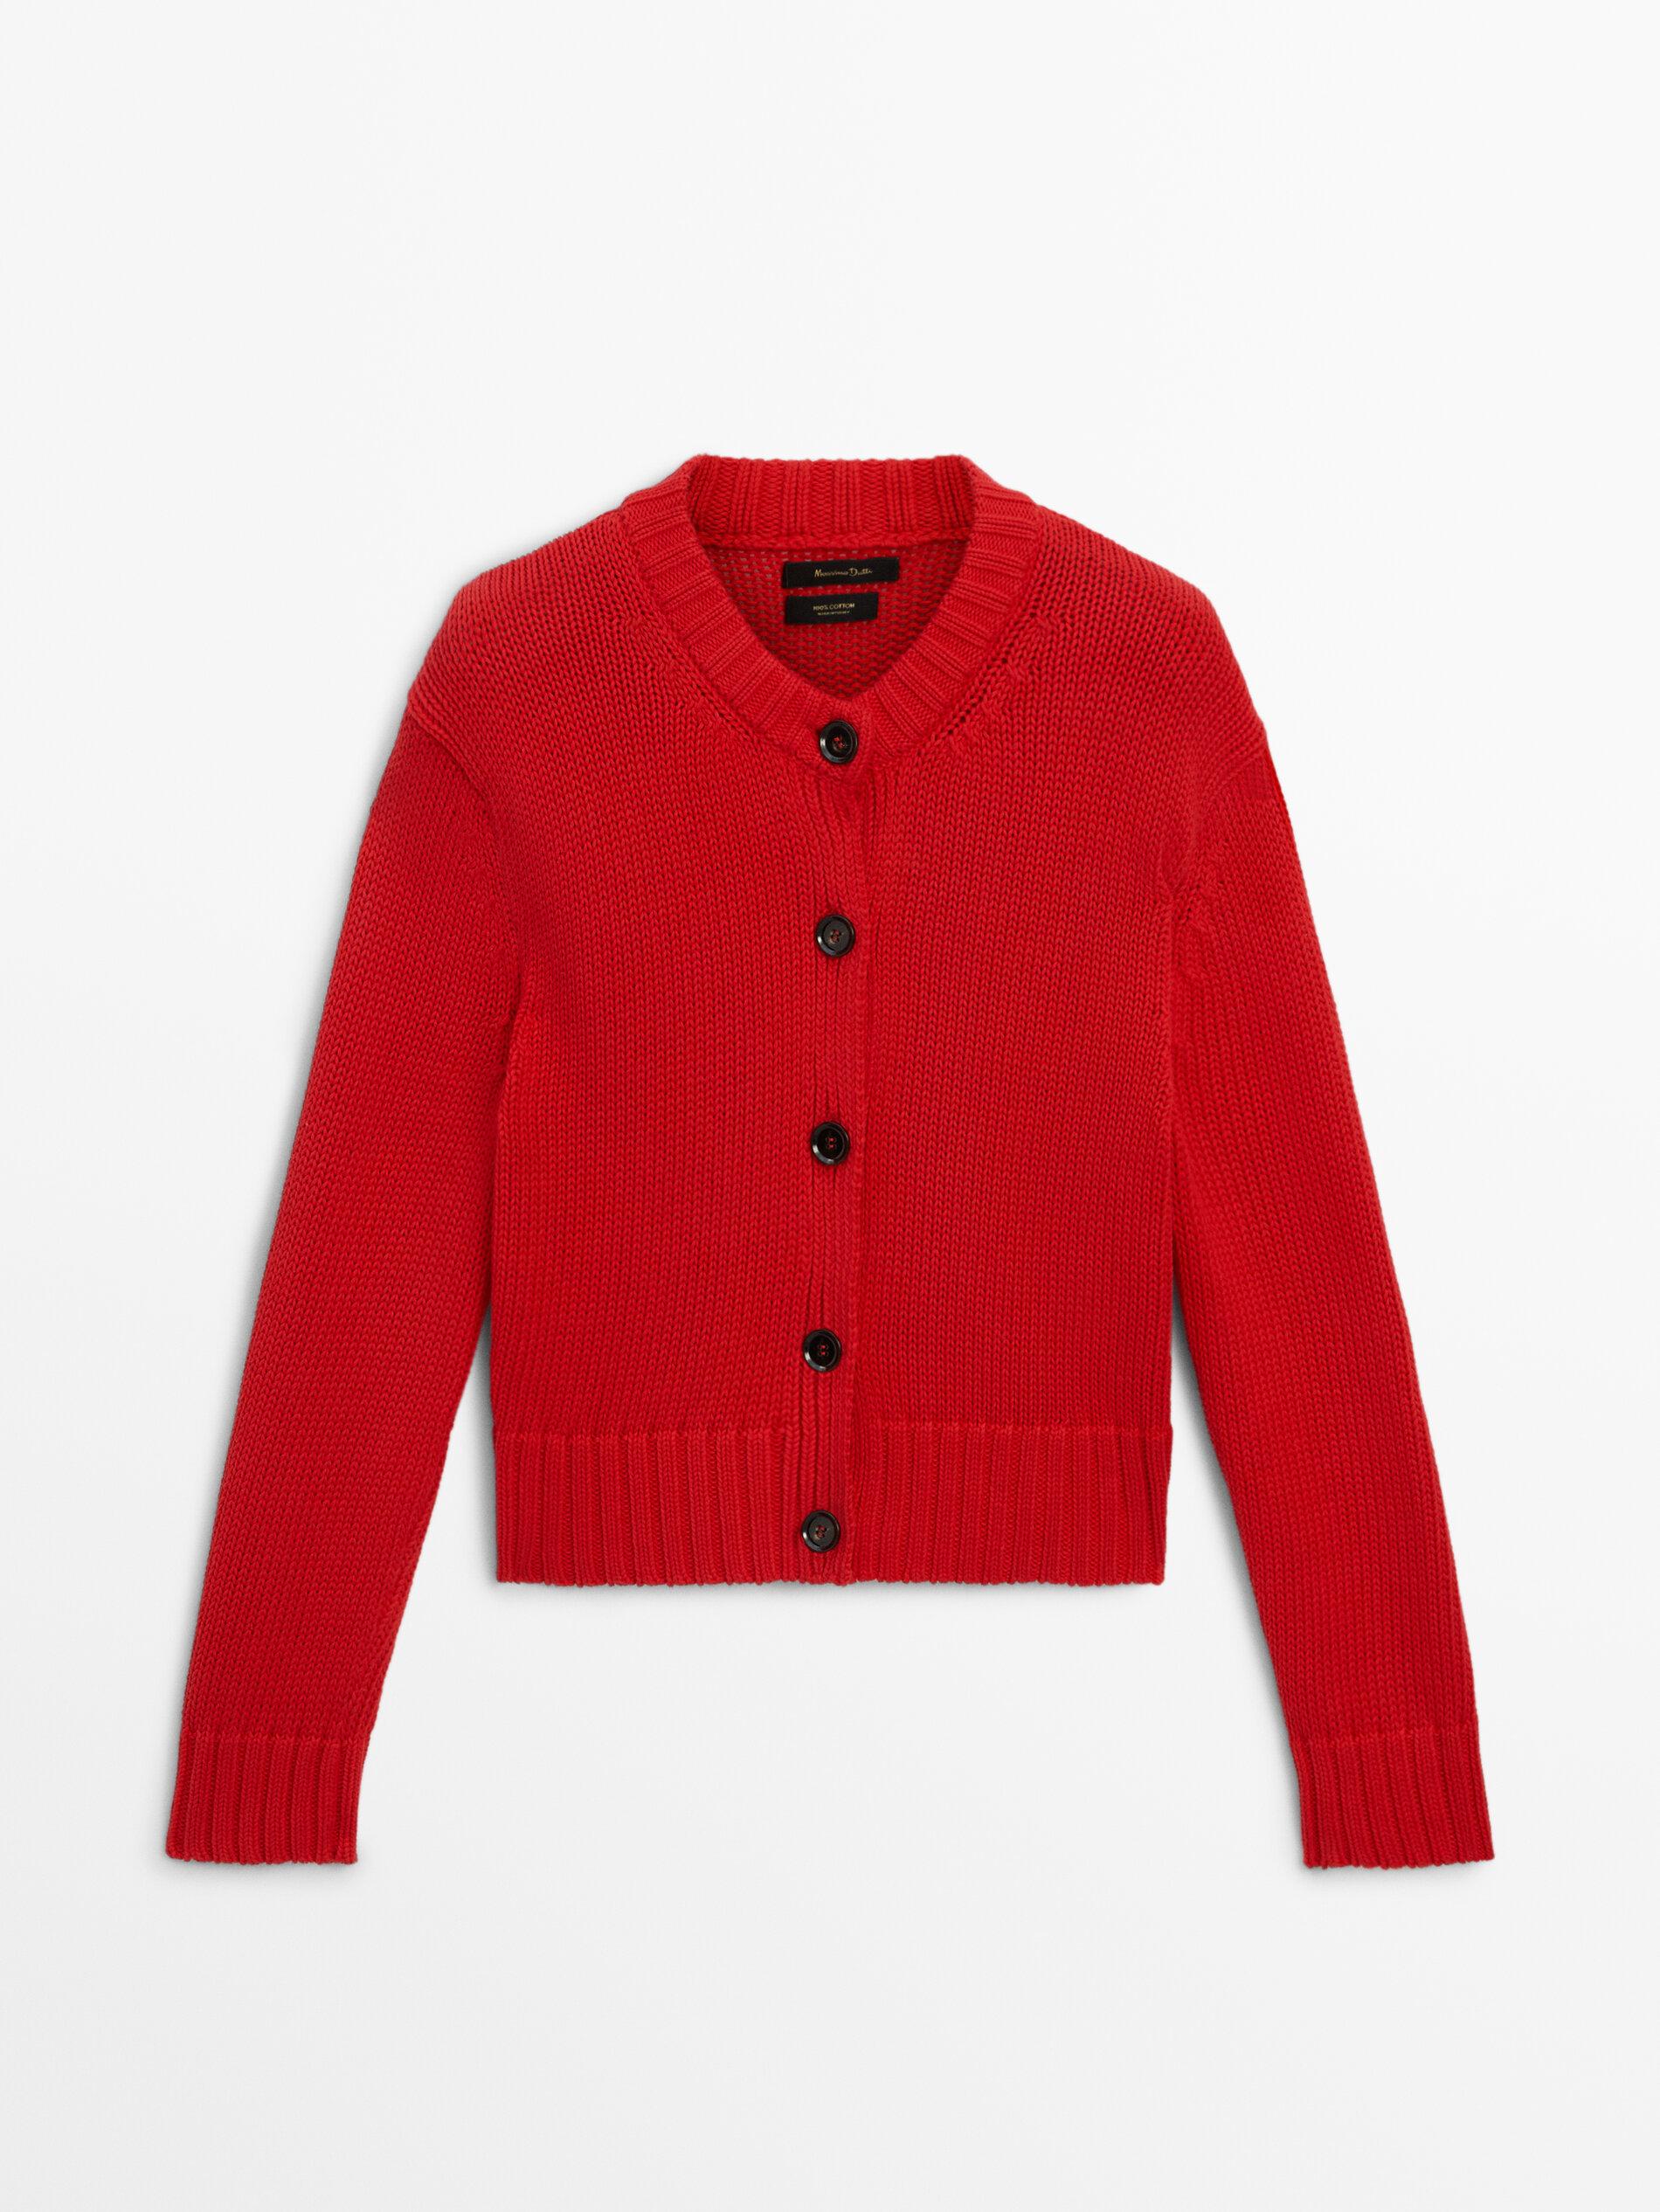 MASSIMO DUTTI 100% Cotton Knit Cardigan With Buttons in Red | Lyst